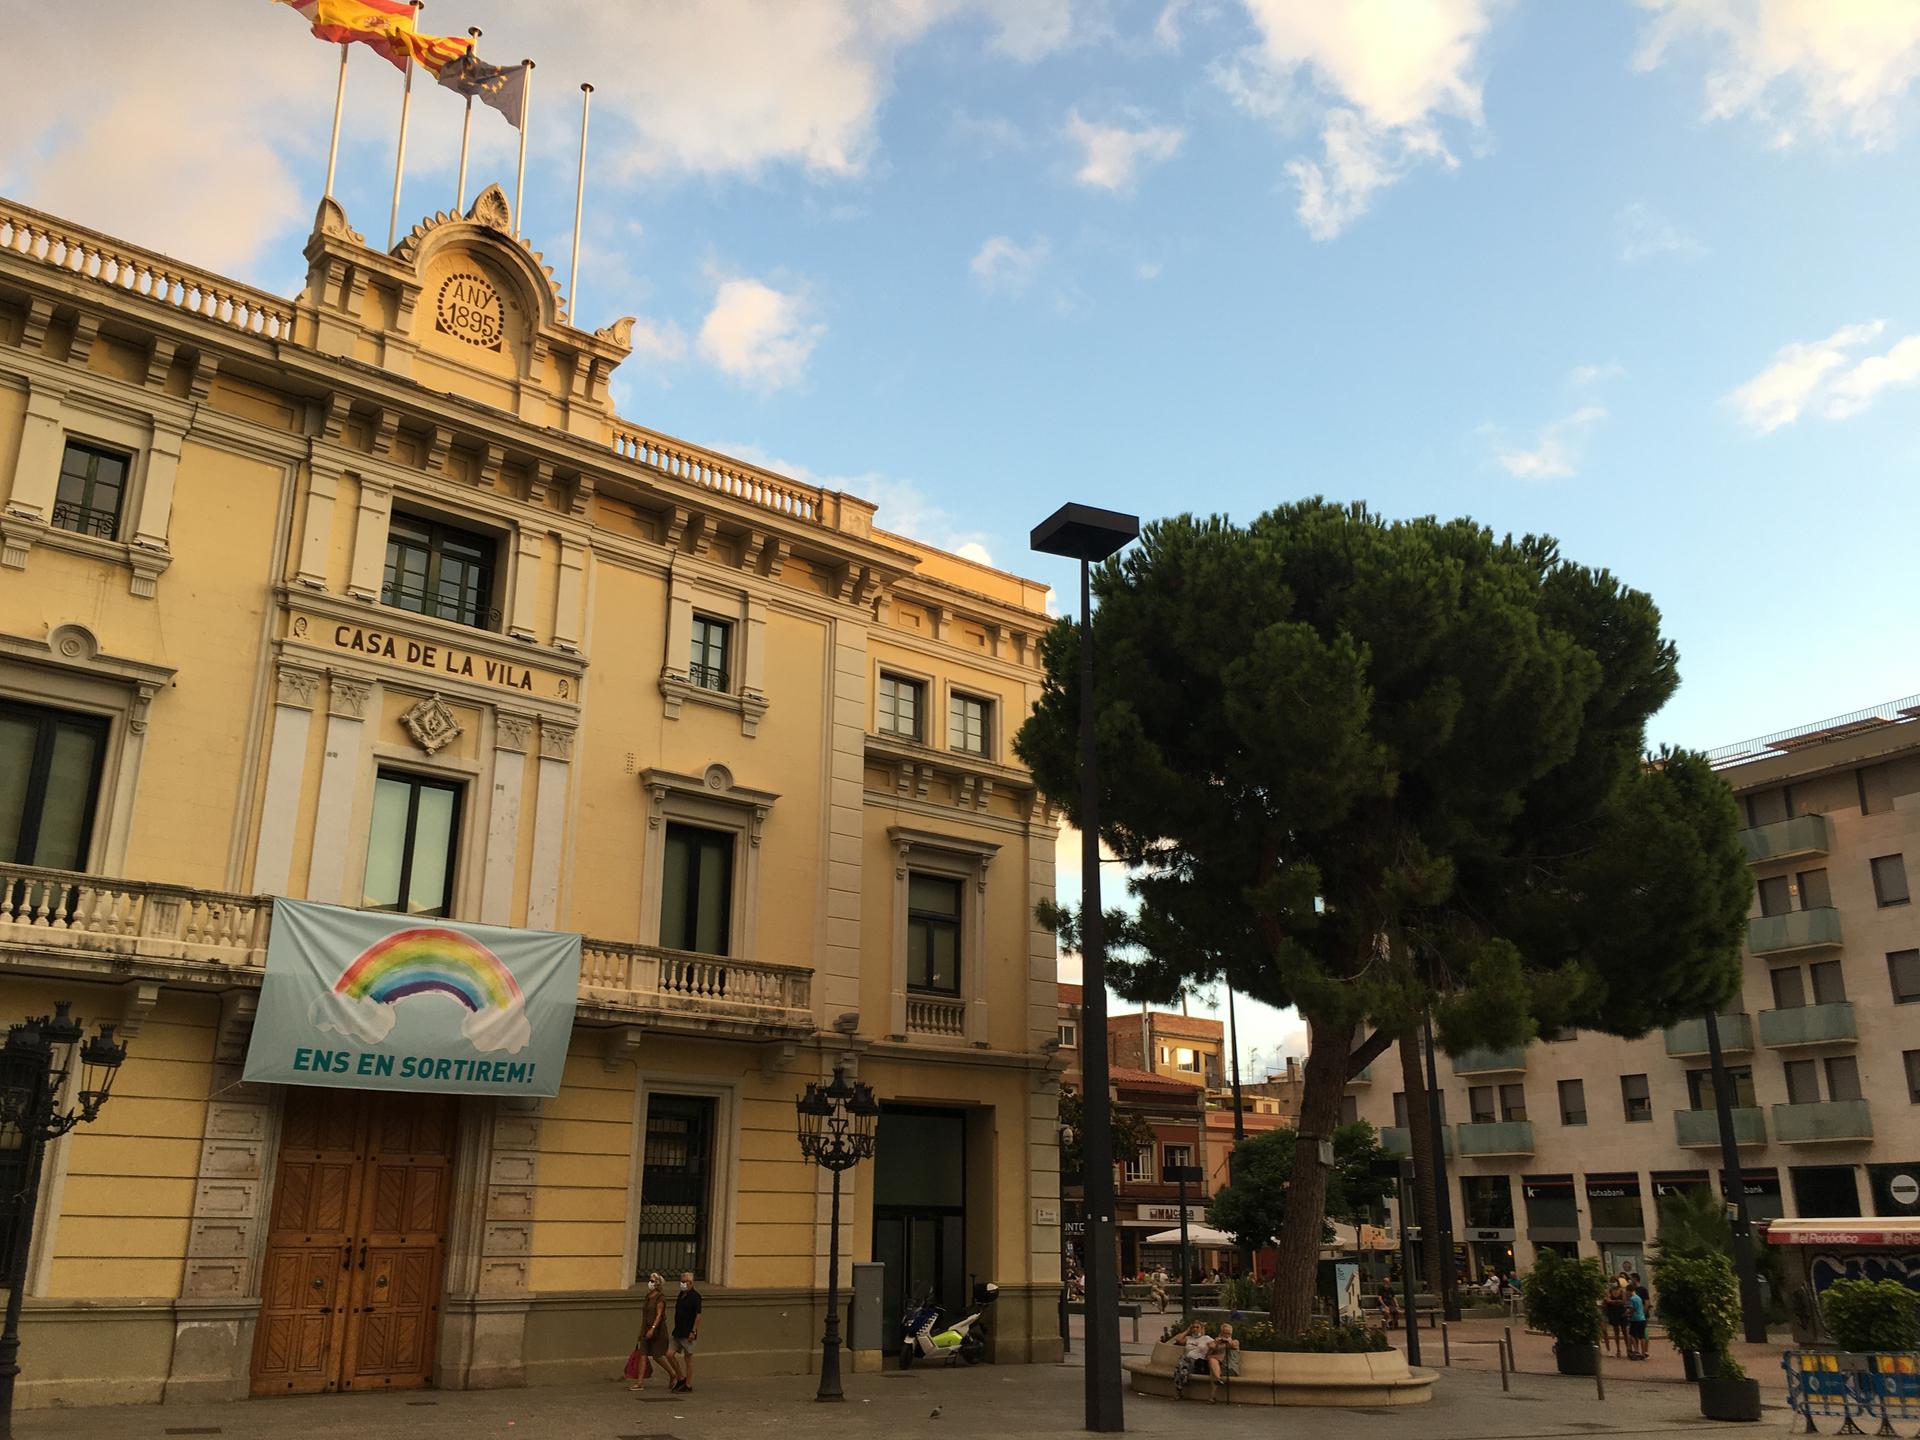 L’Hospitalet de Llobregat, which has historically been a working-class city with a large migrant population, is beginning to see rent prices comparable to those in Barcelona.